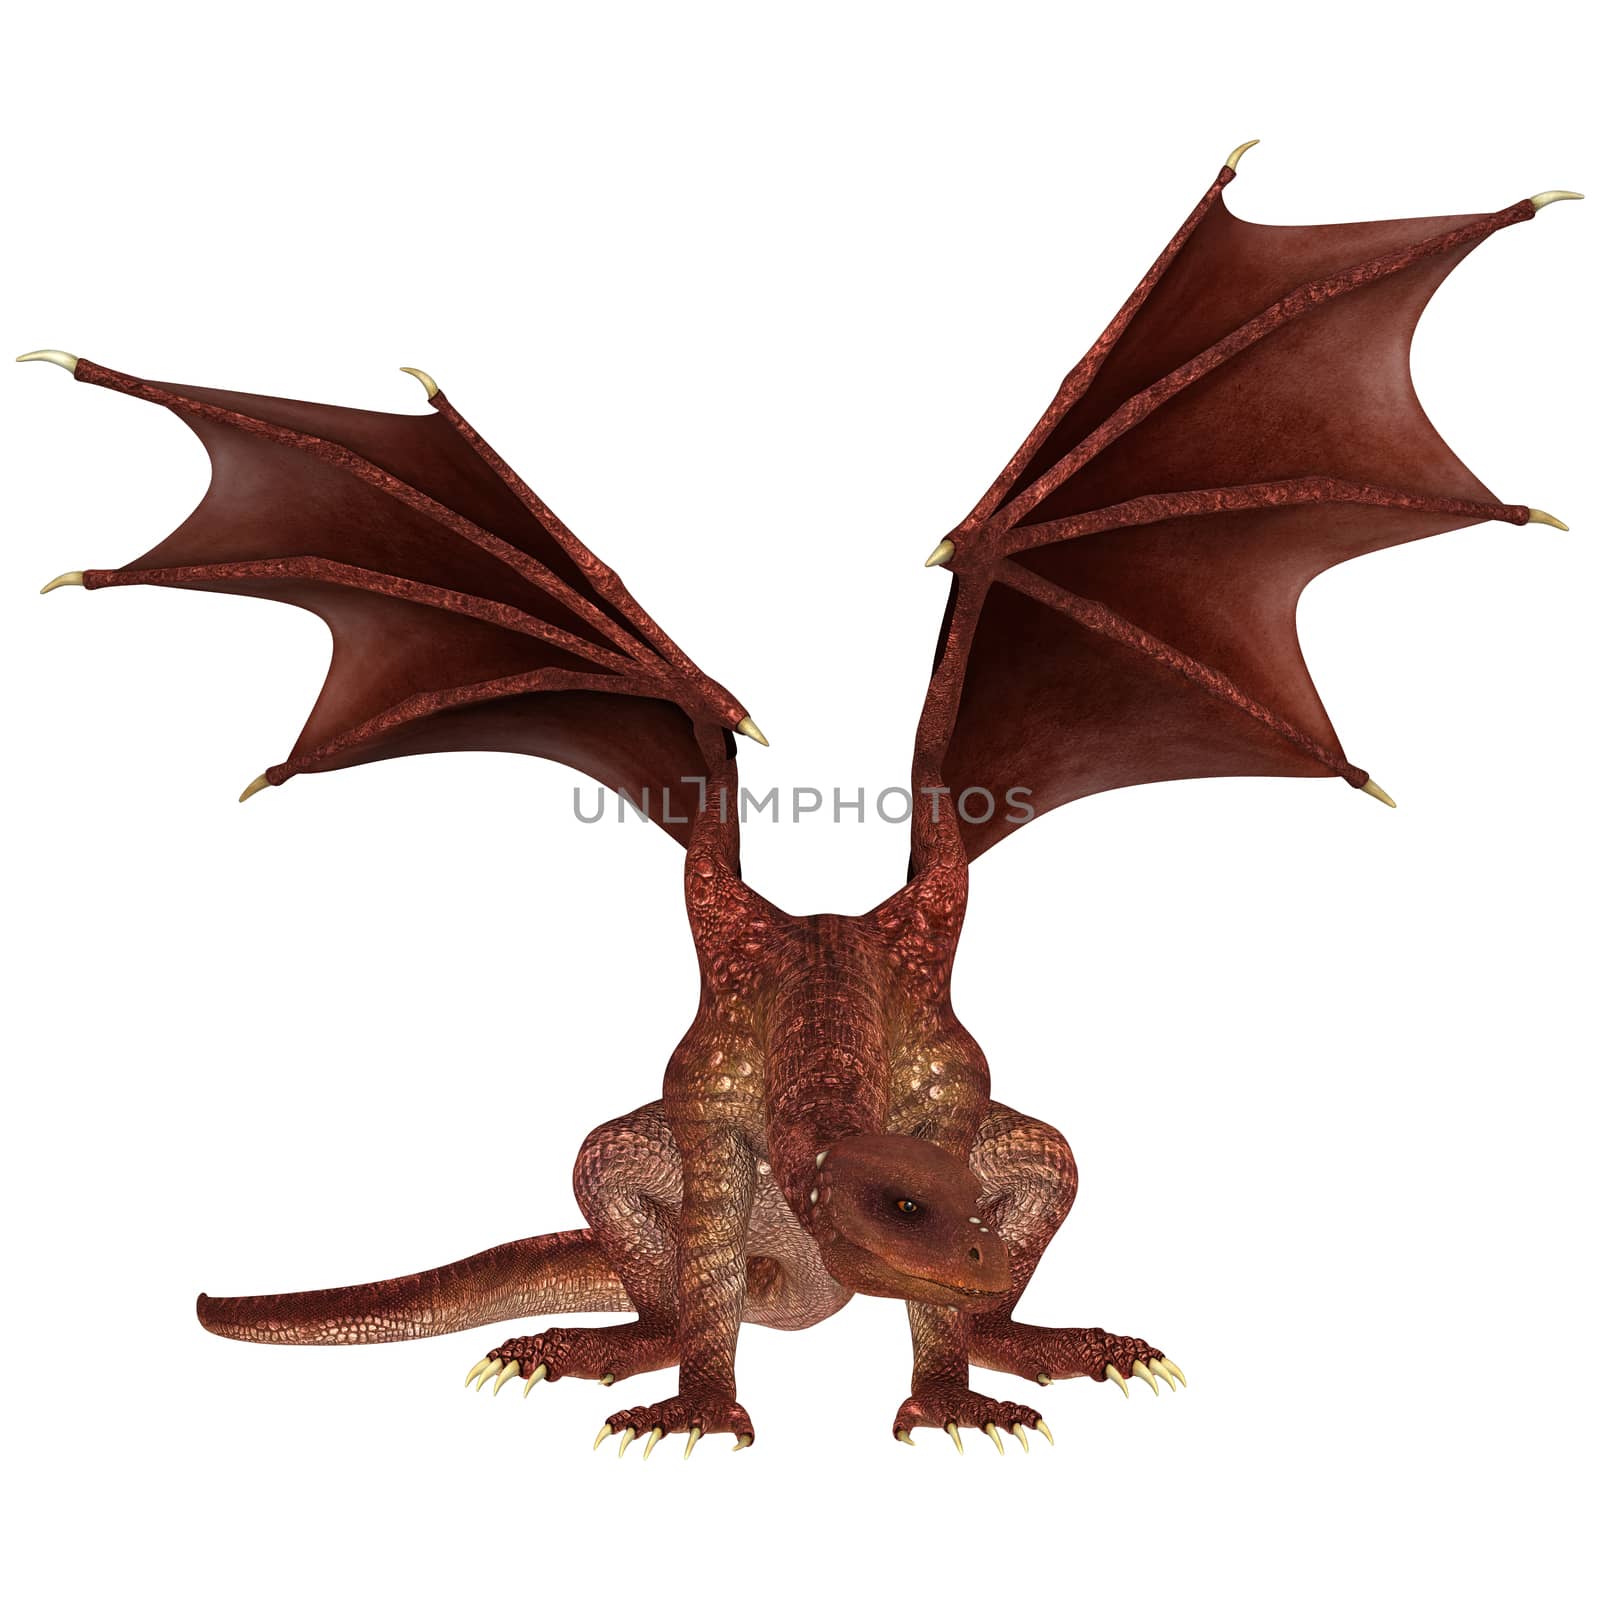 3D digital render of a red fantasy dragon isolated on white background